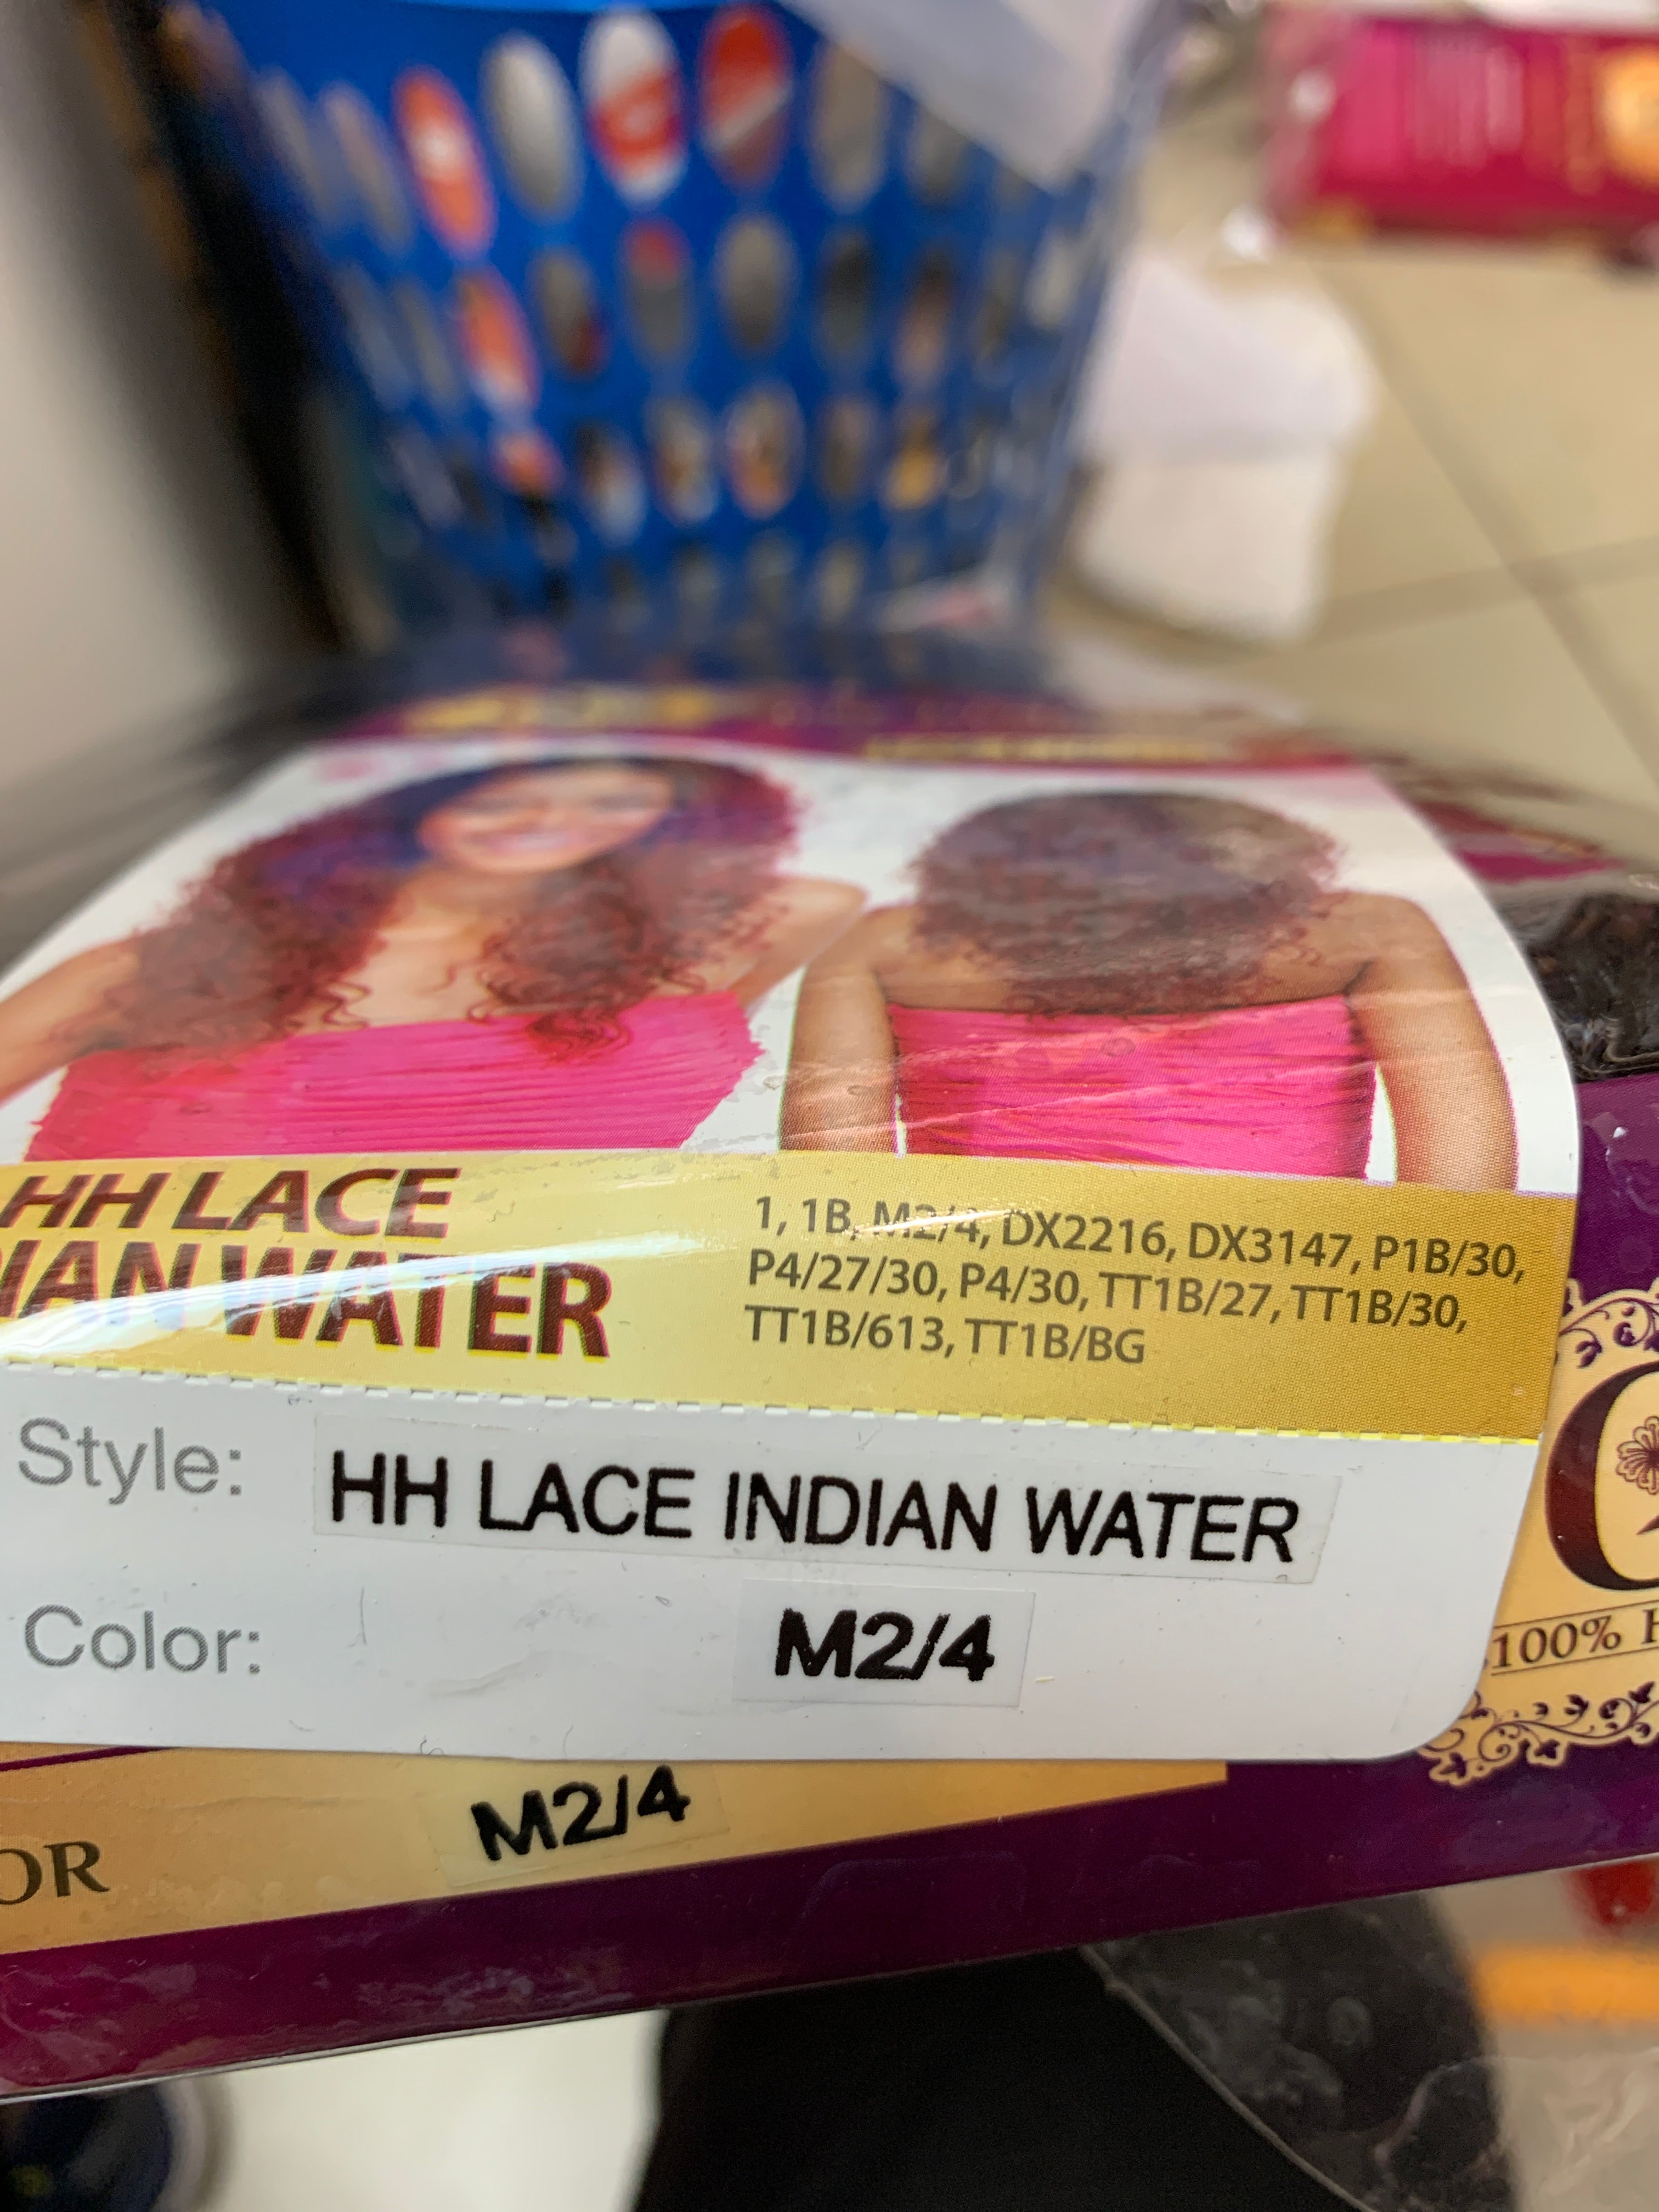 It’s a wig hh lace indian water